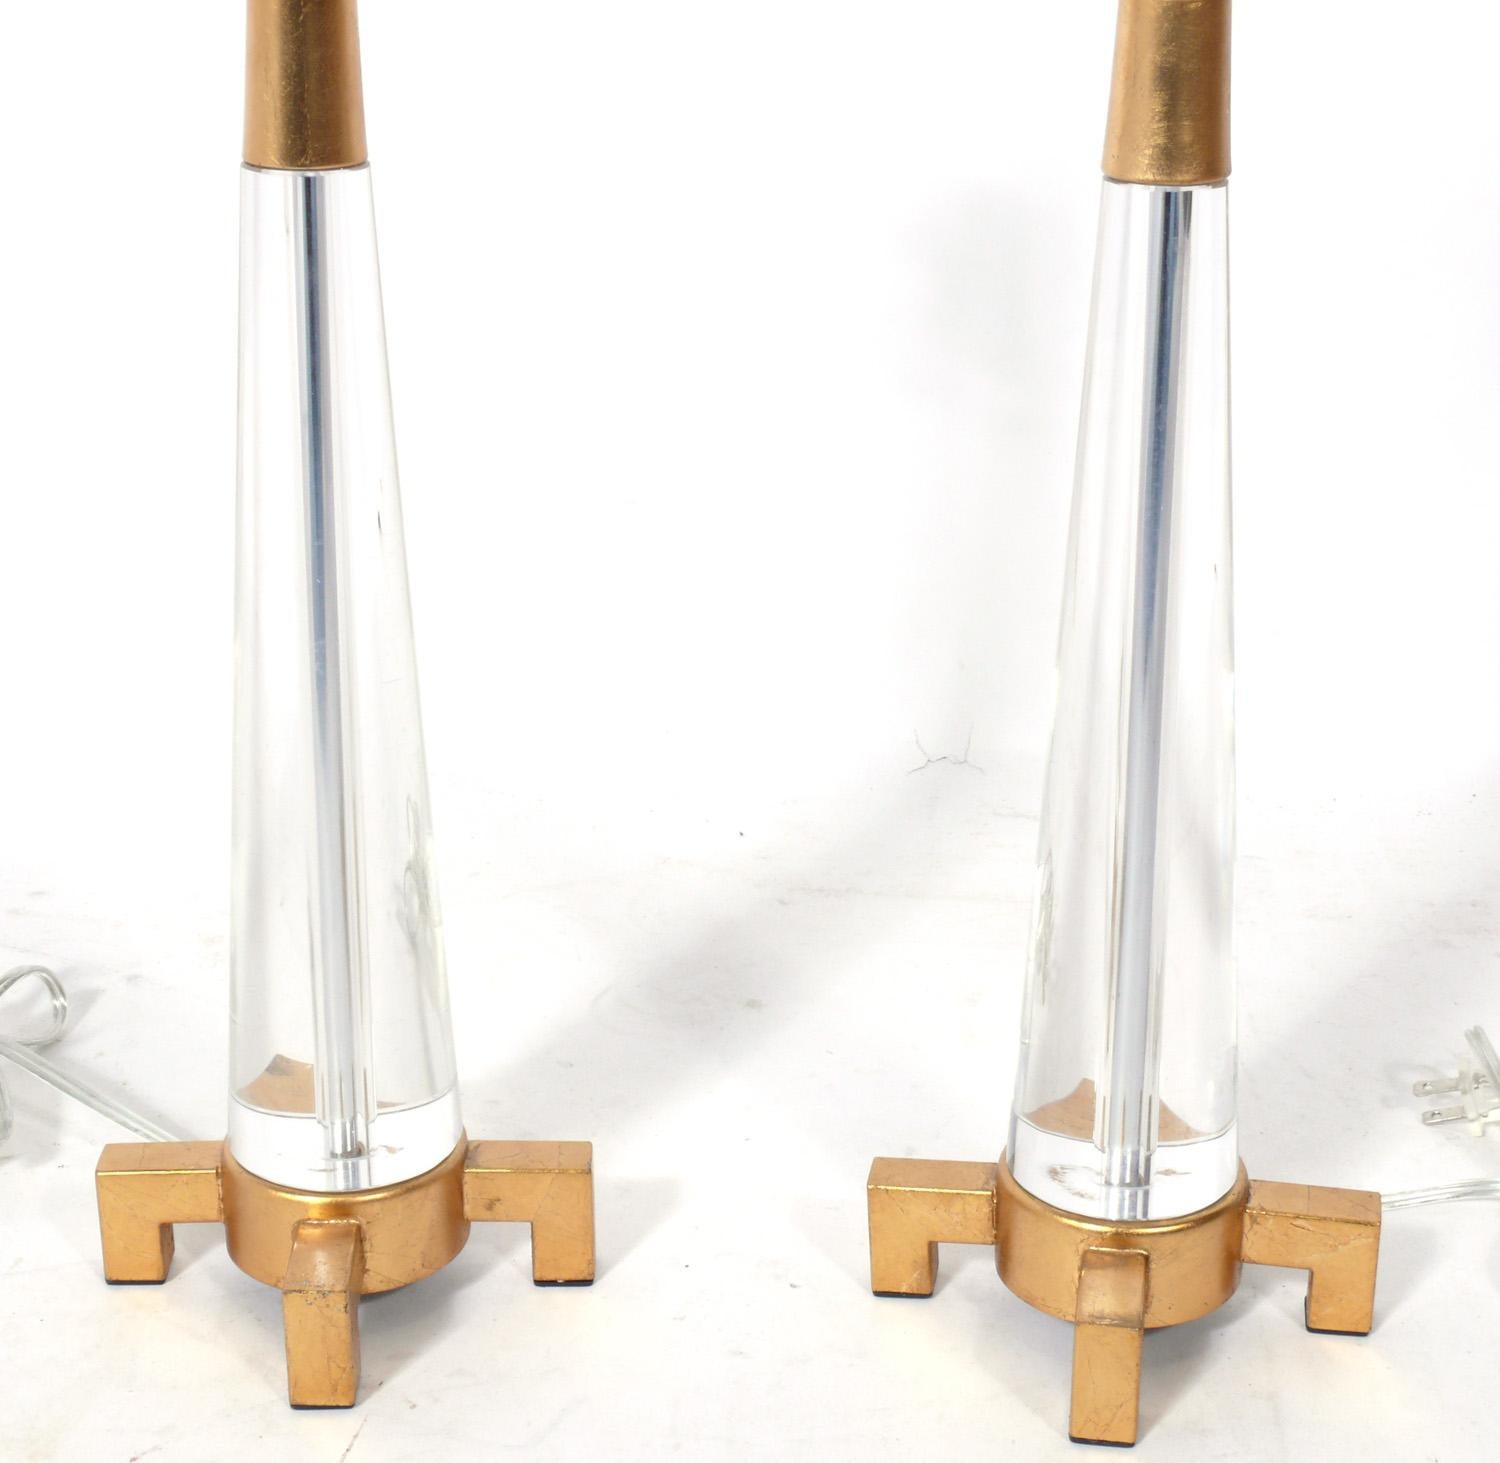 Lucite or Acrylic and Gilt Metal Lamps, American, circa 2000s. The price noted includes the shades.